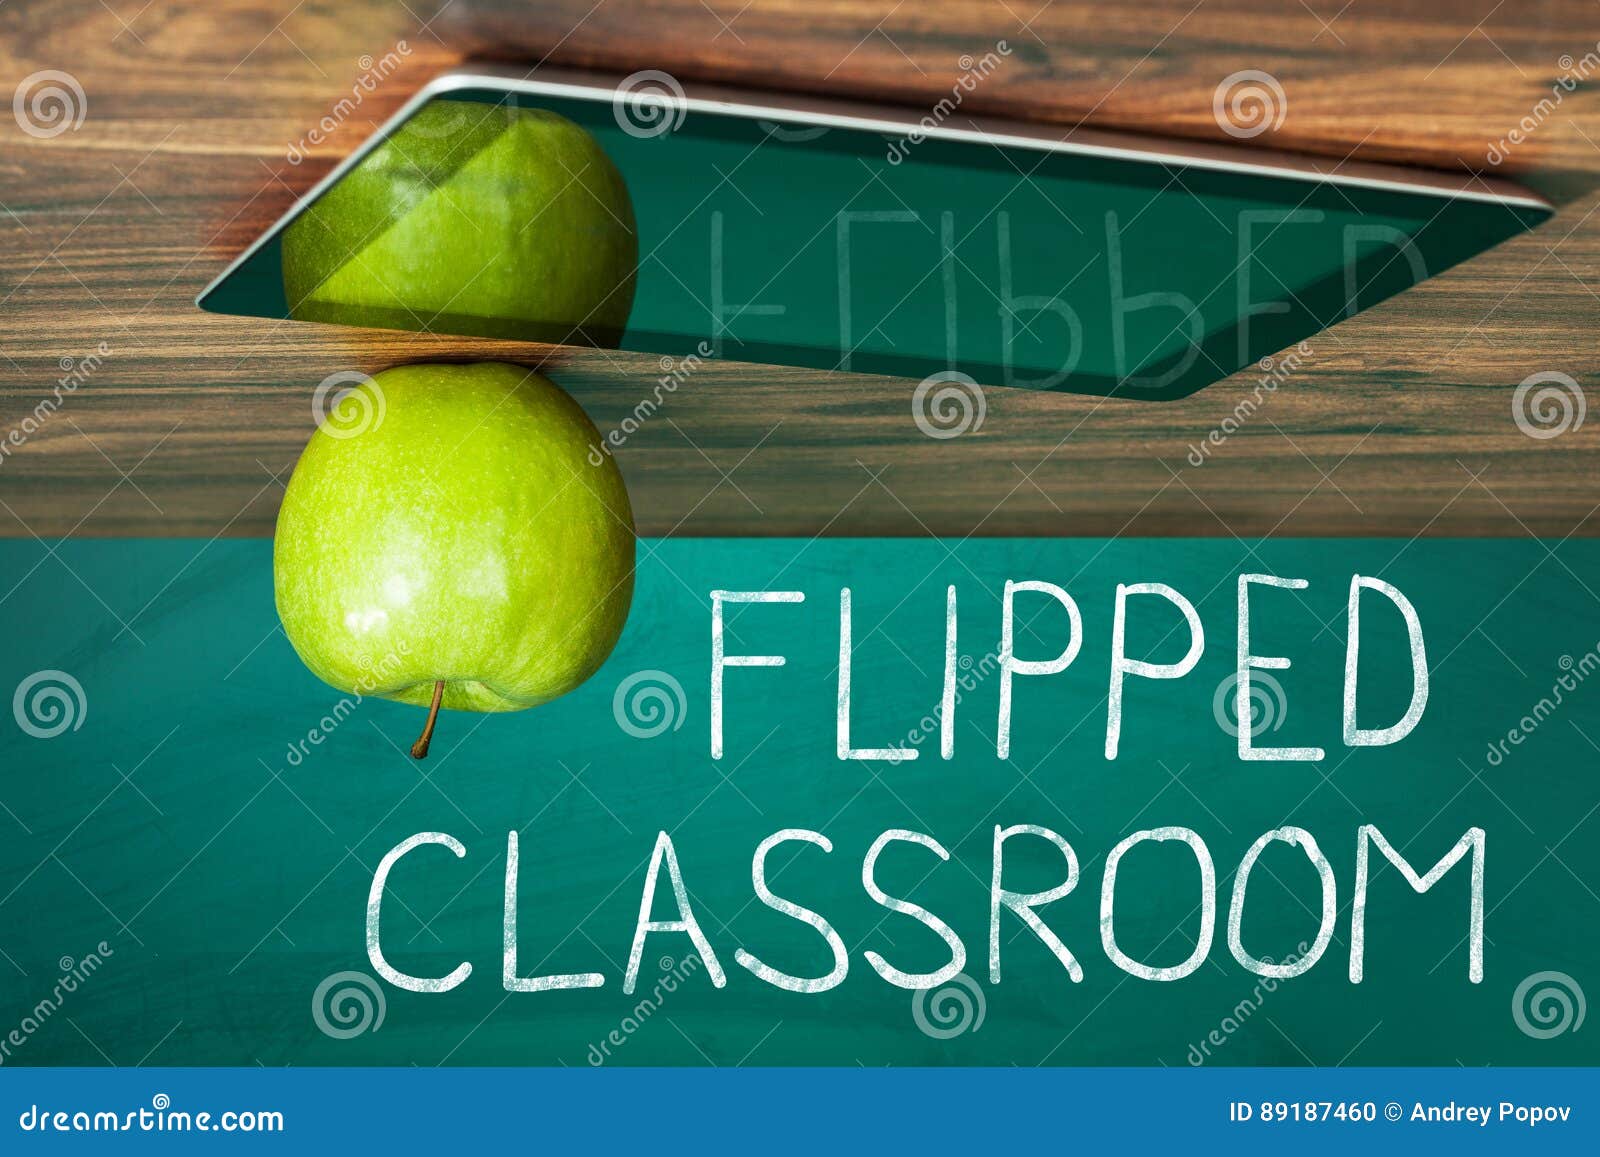 flipped classroom concept